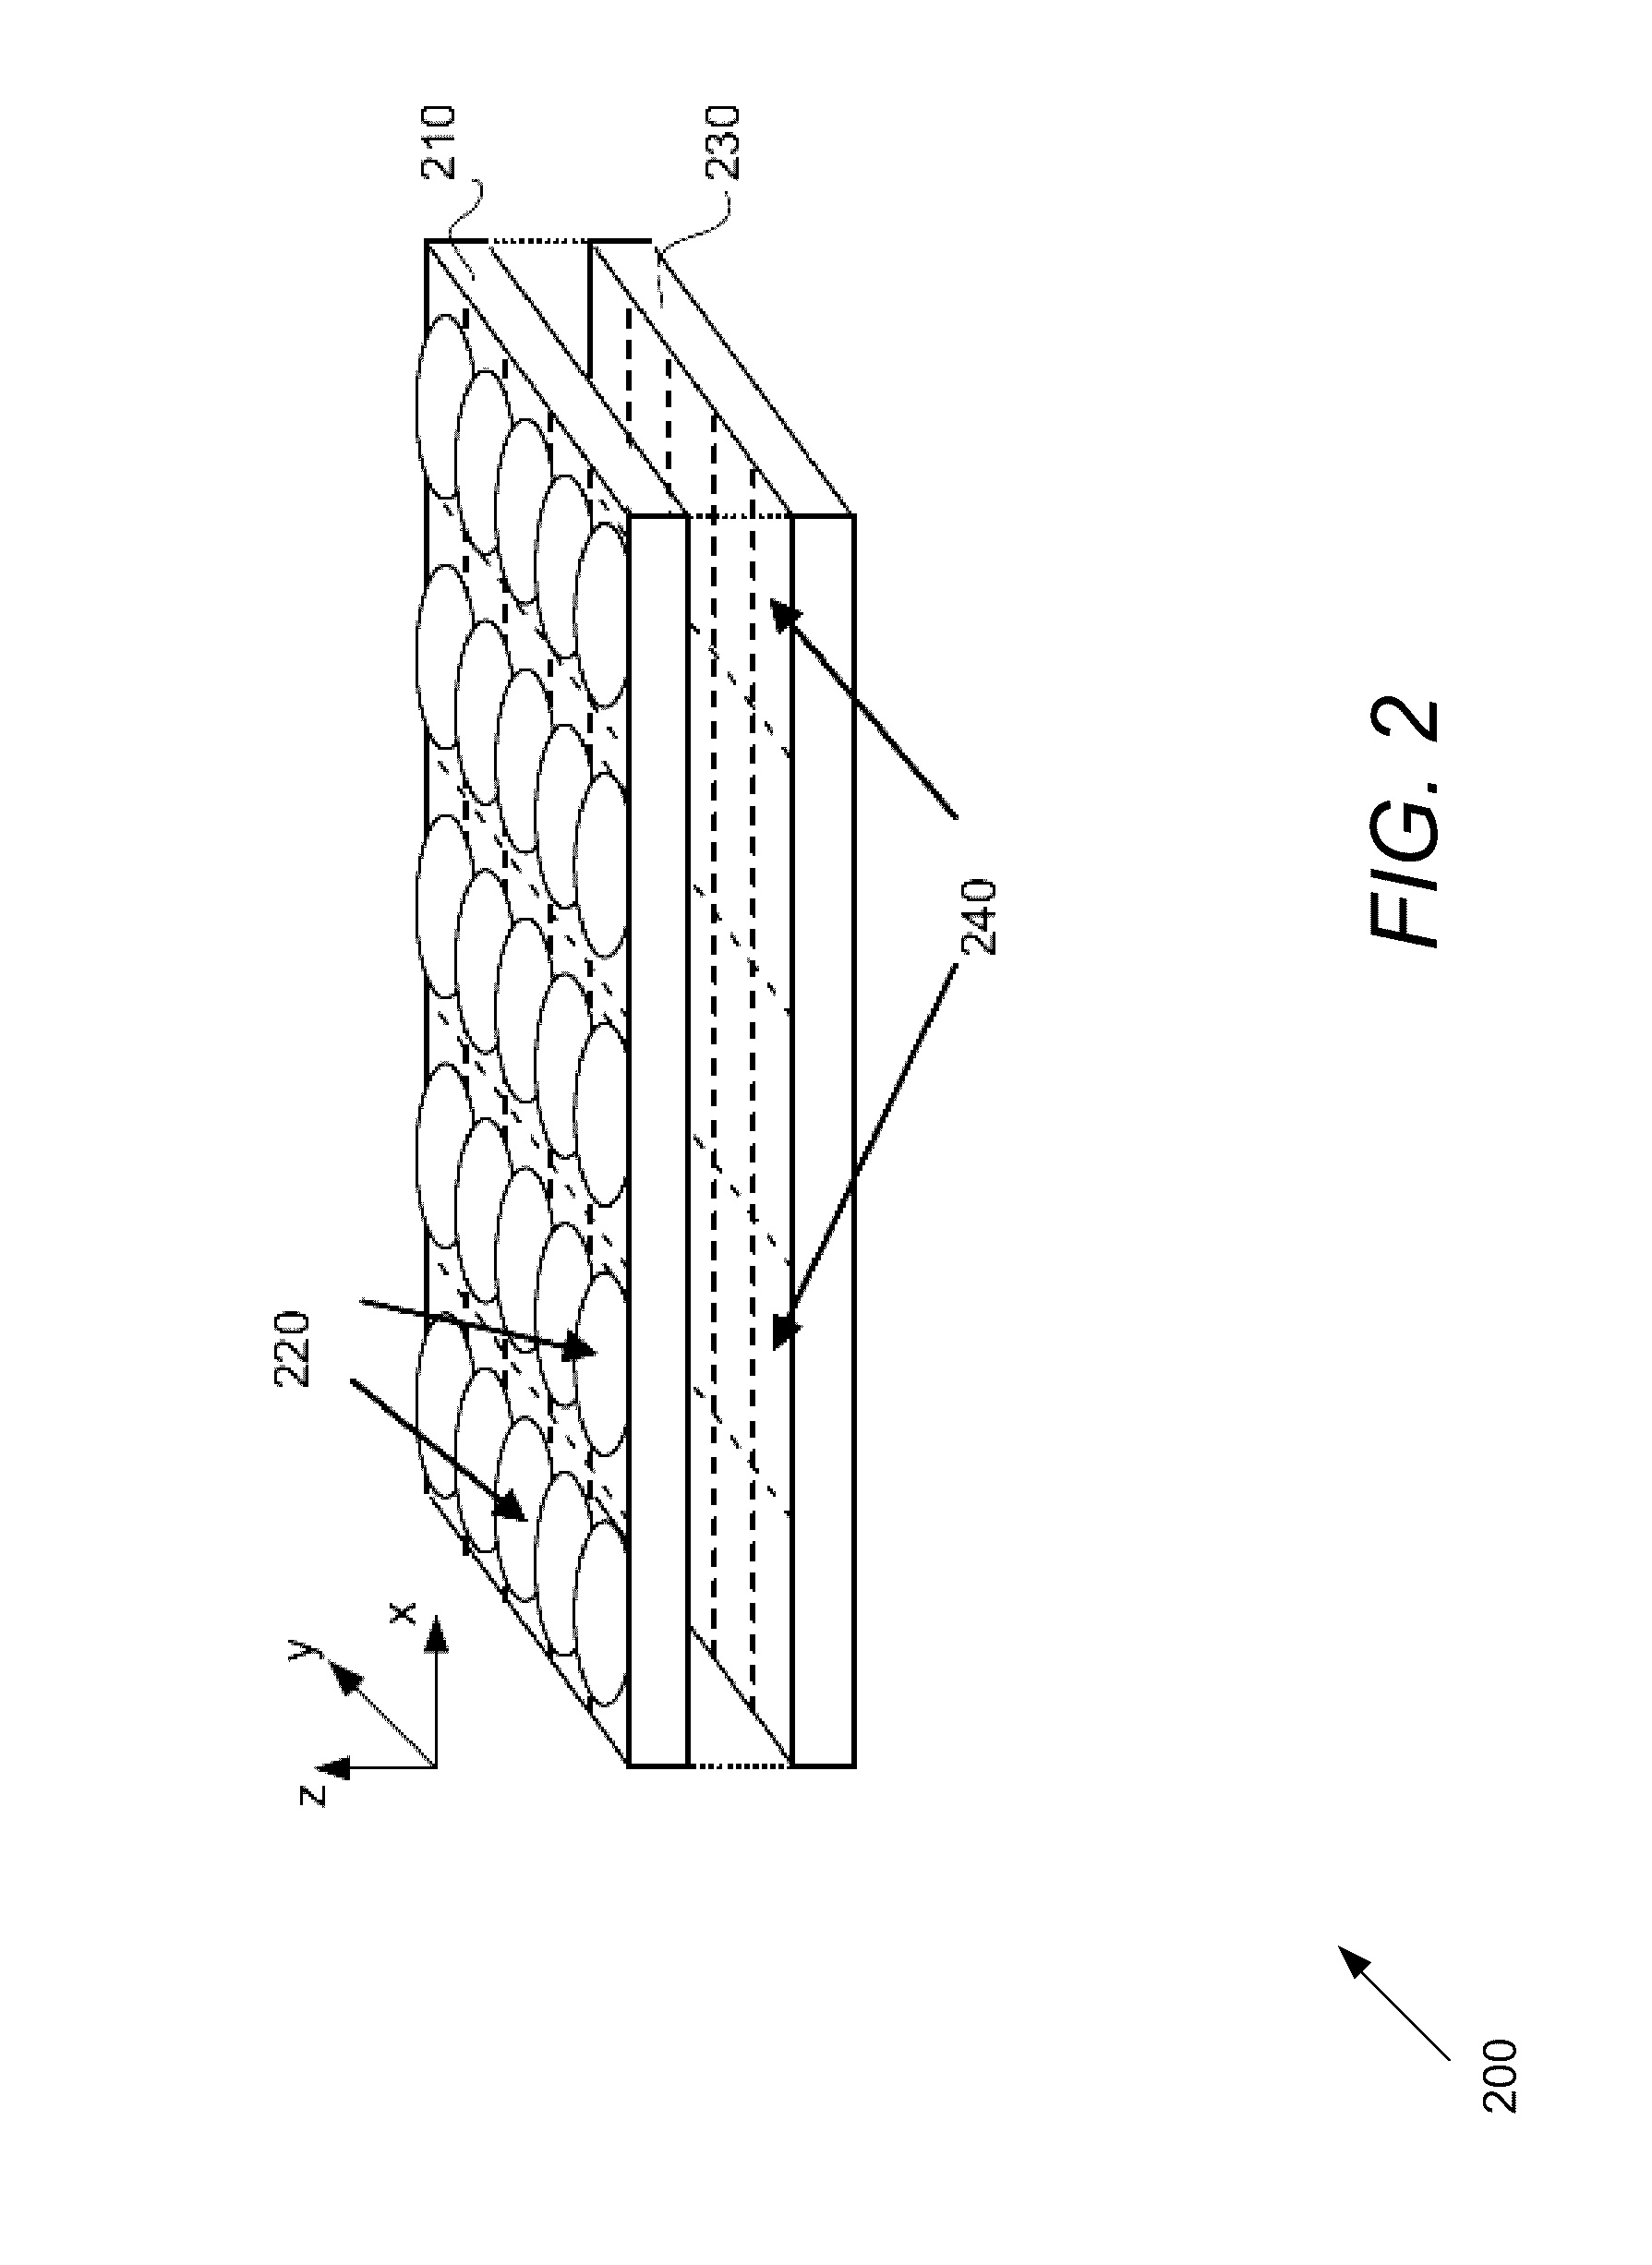 Systems and Methods for Performing High Speed Video Capture and Depth Estimation Using Array Cameras